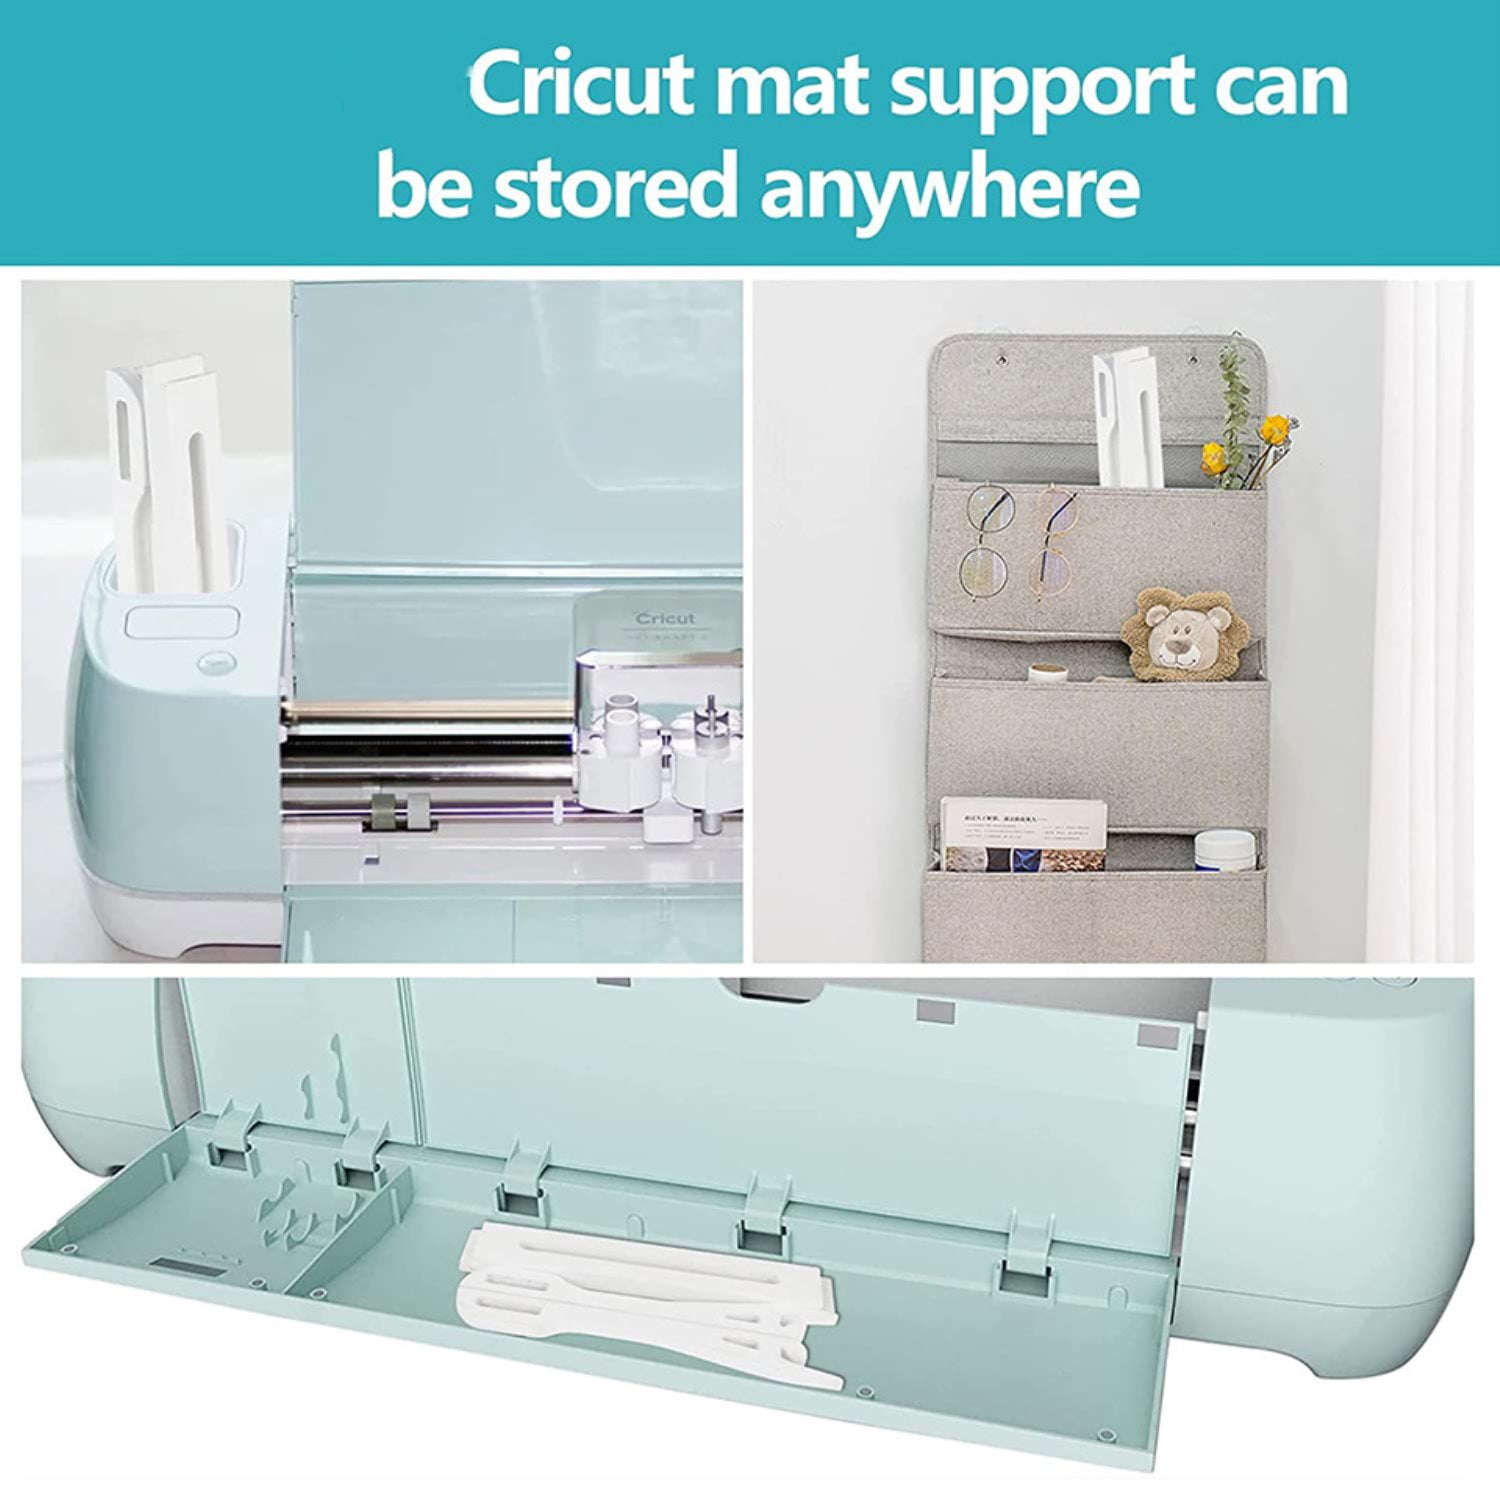 Cricut Maker Mat Extension Support by JohnTrotto